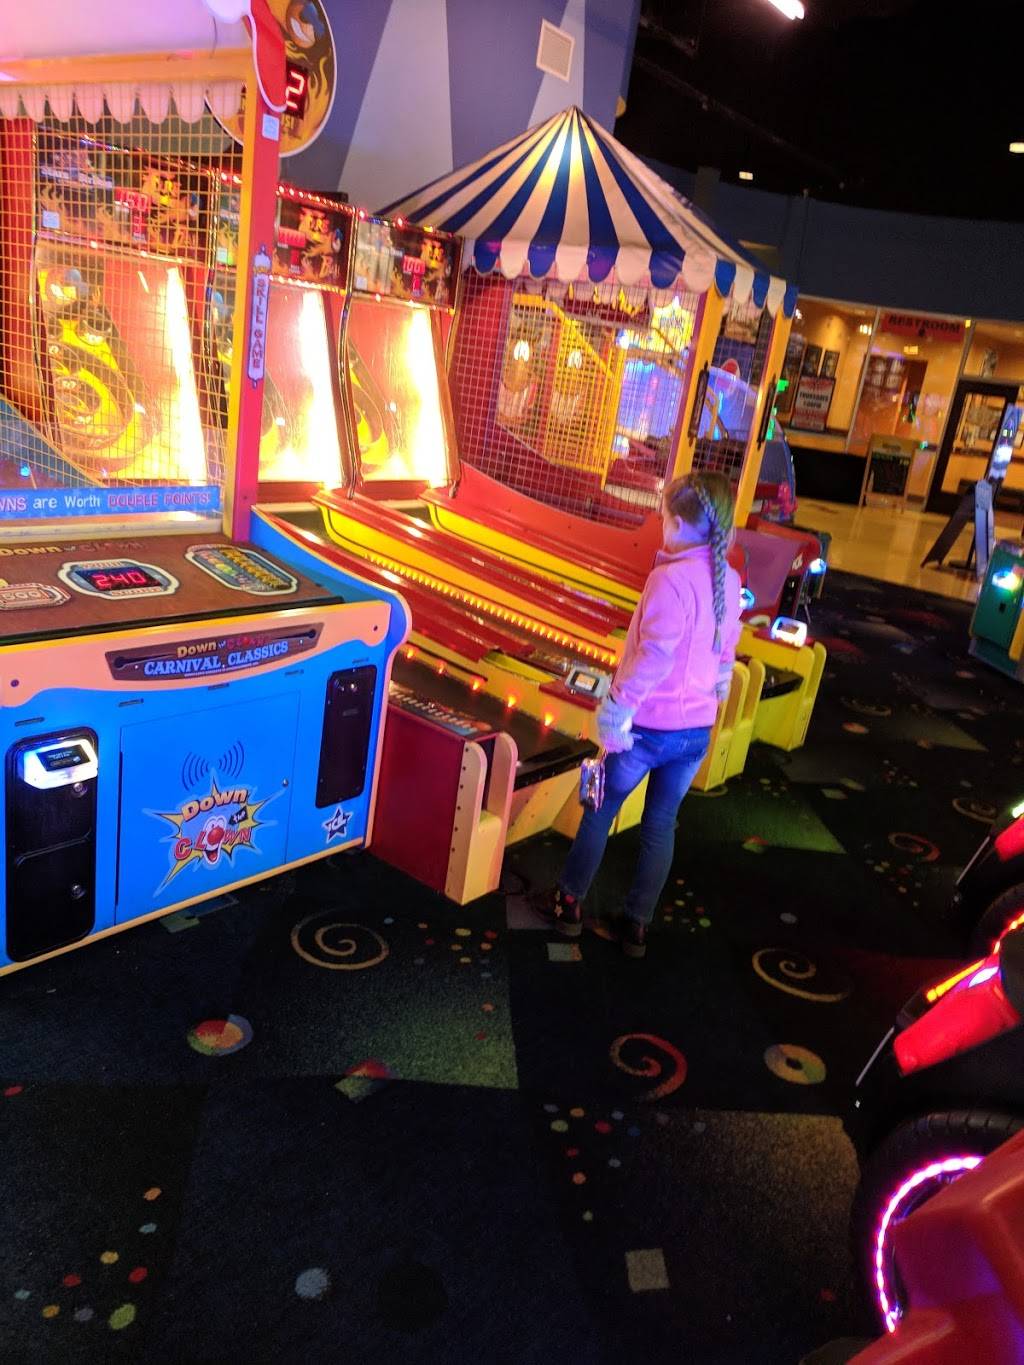 stars and strikes family entertainment centers